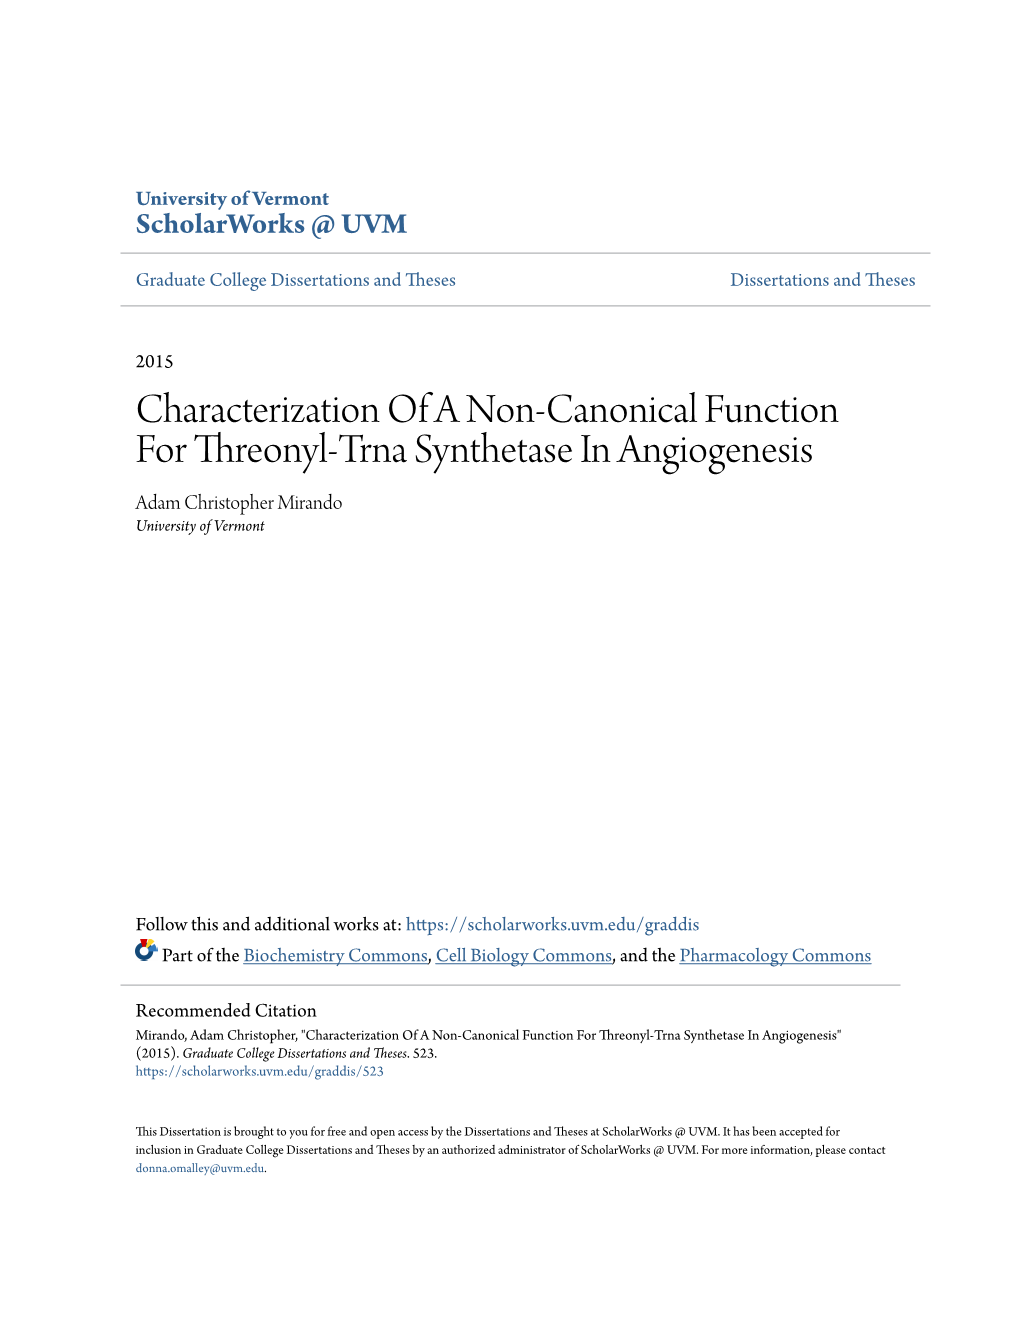 Characterization of a Non-Canonical Function for Threonyl-Trna Synthetase in Angiogenesis Adam Christopher Mirando University of Vermont